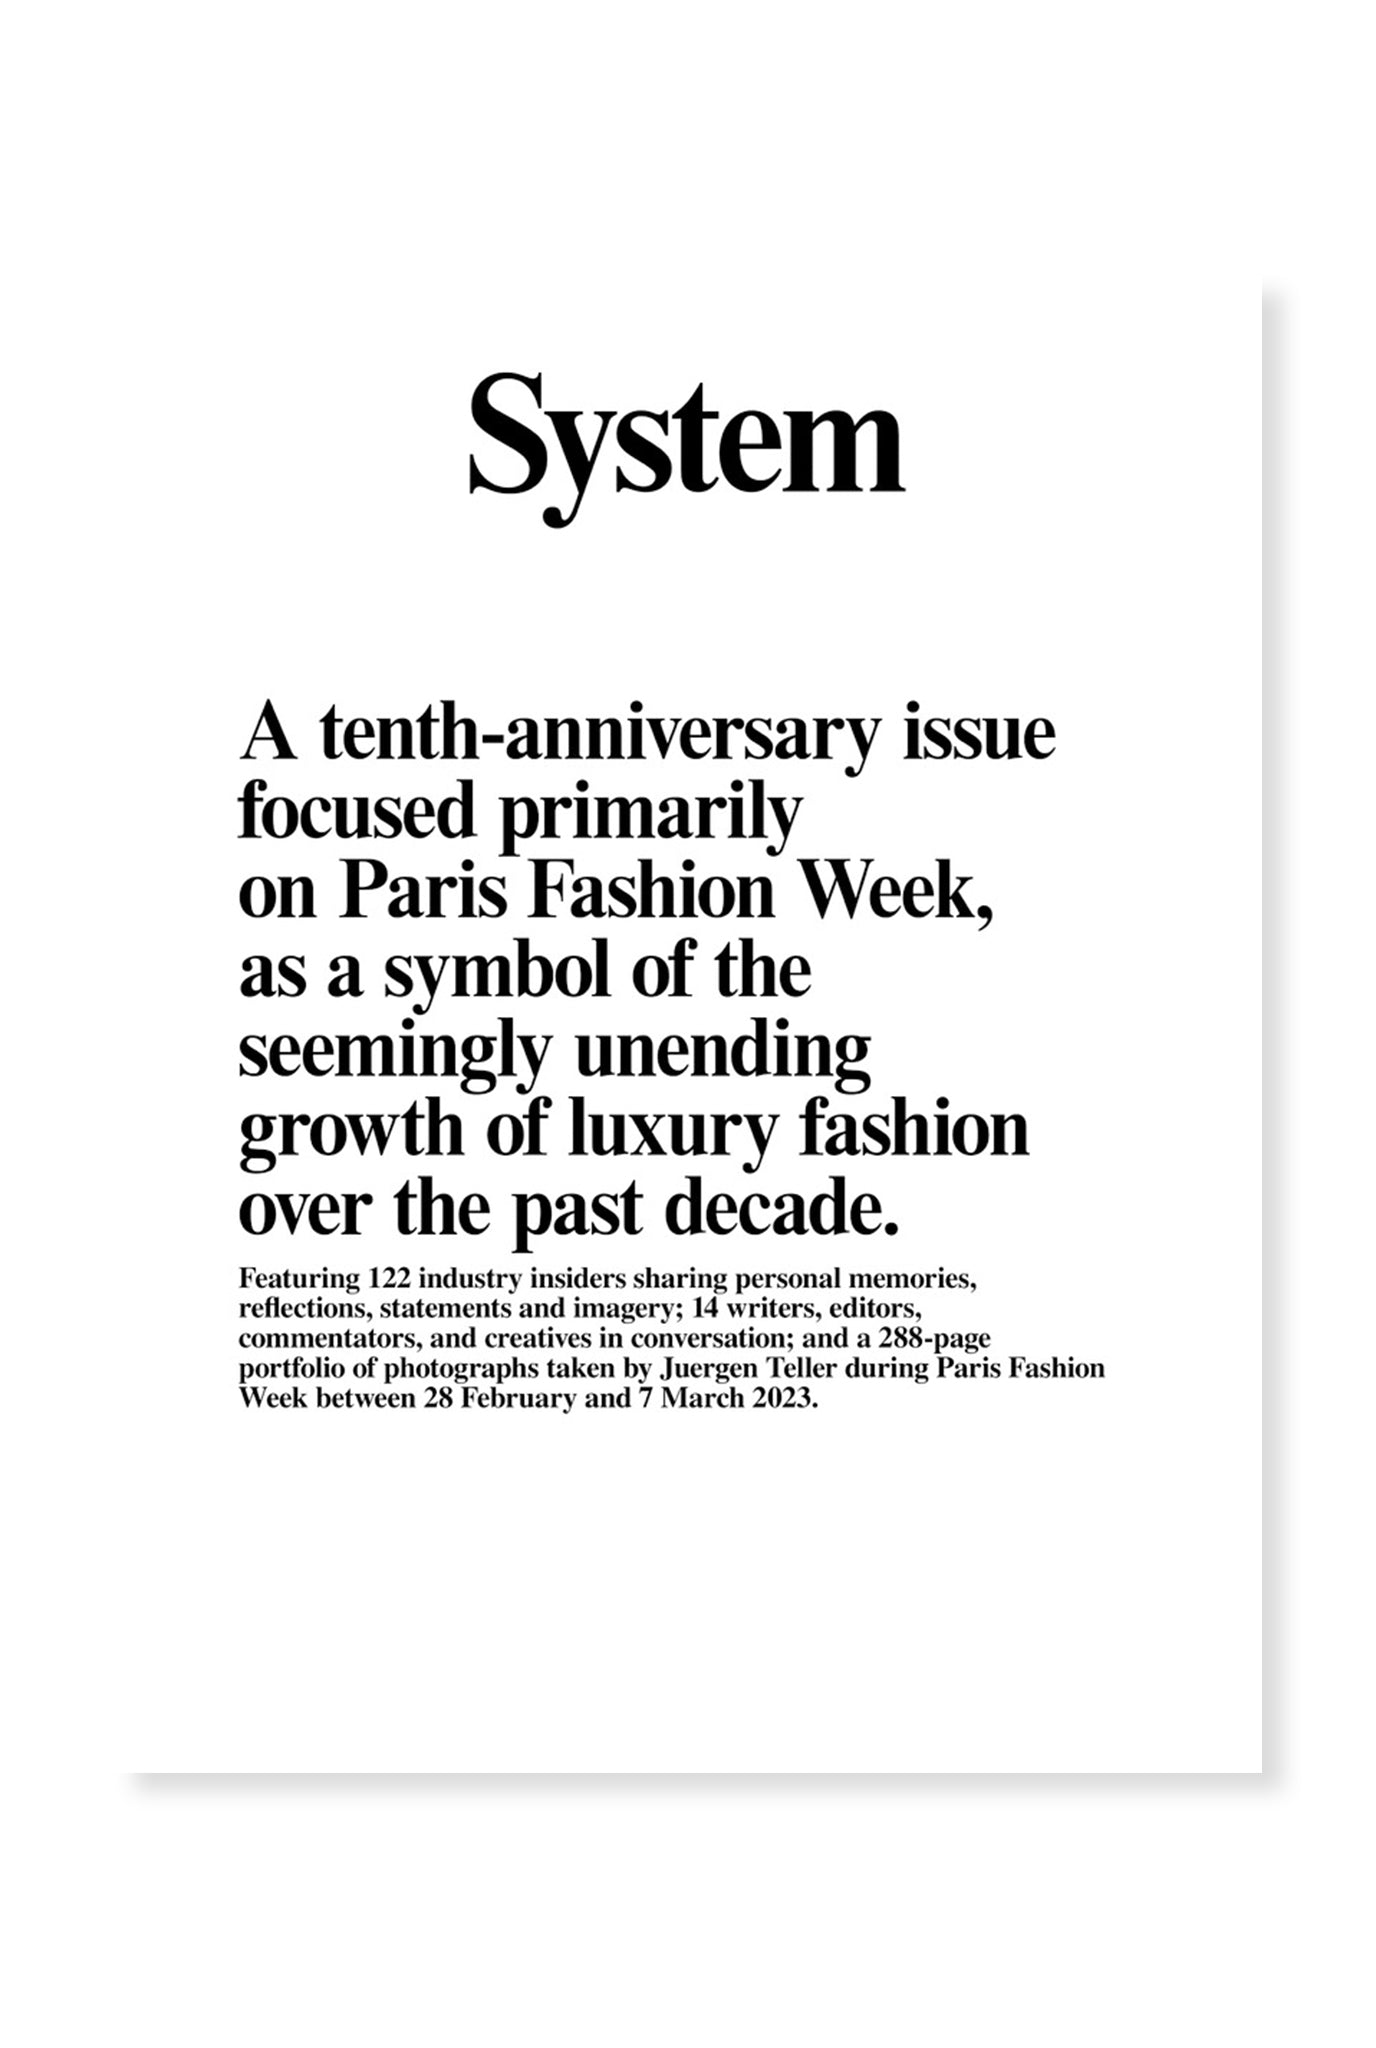 System Magazine, Issue 21 - 10th Anniversary Boxed Issue